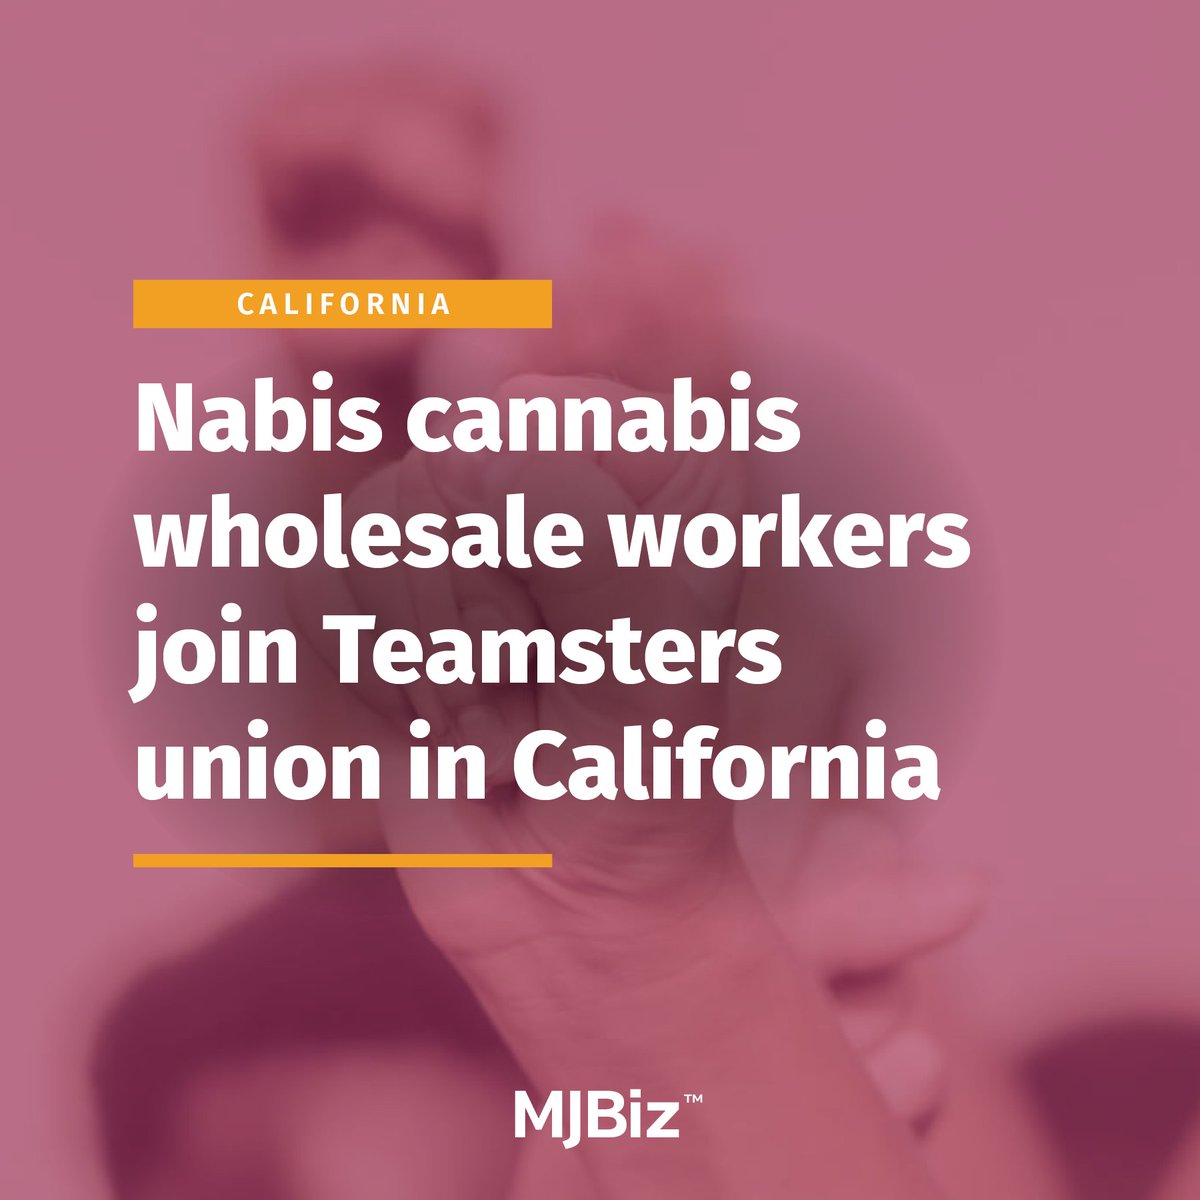 Employees at San Francisco-based #cannabis wholesaler Nabis are the latest to join the @Teamsters Local 630 labor union. The 84 new members, made up of drivers and associates, are the third group to join the Local 630 in the past three weeks. Get the details: